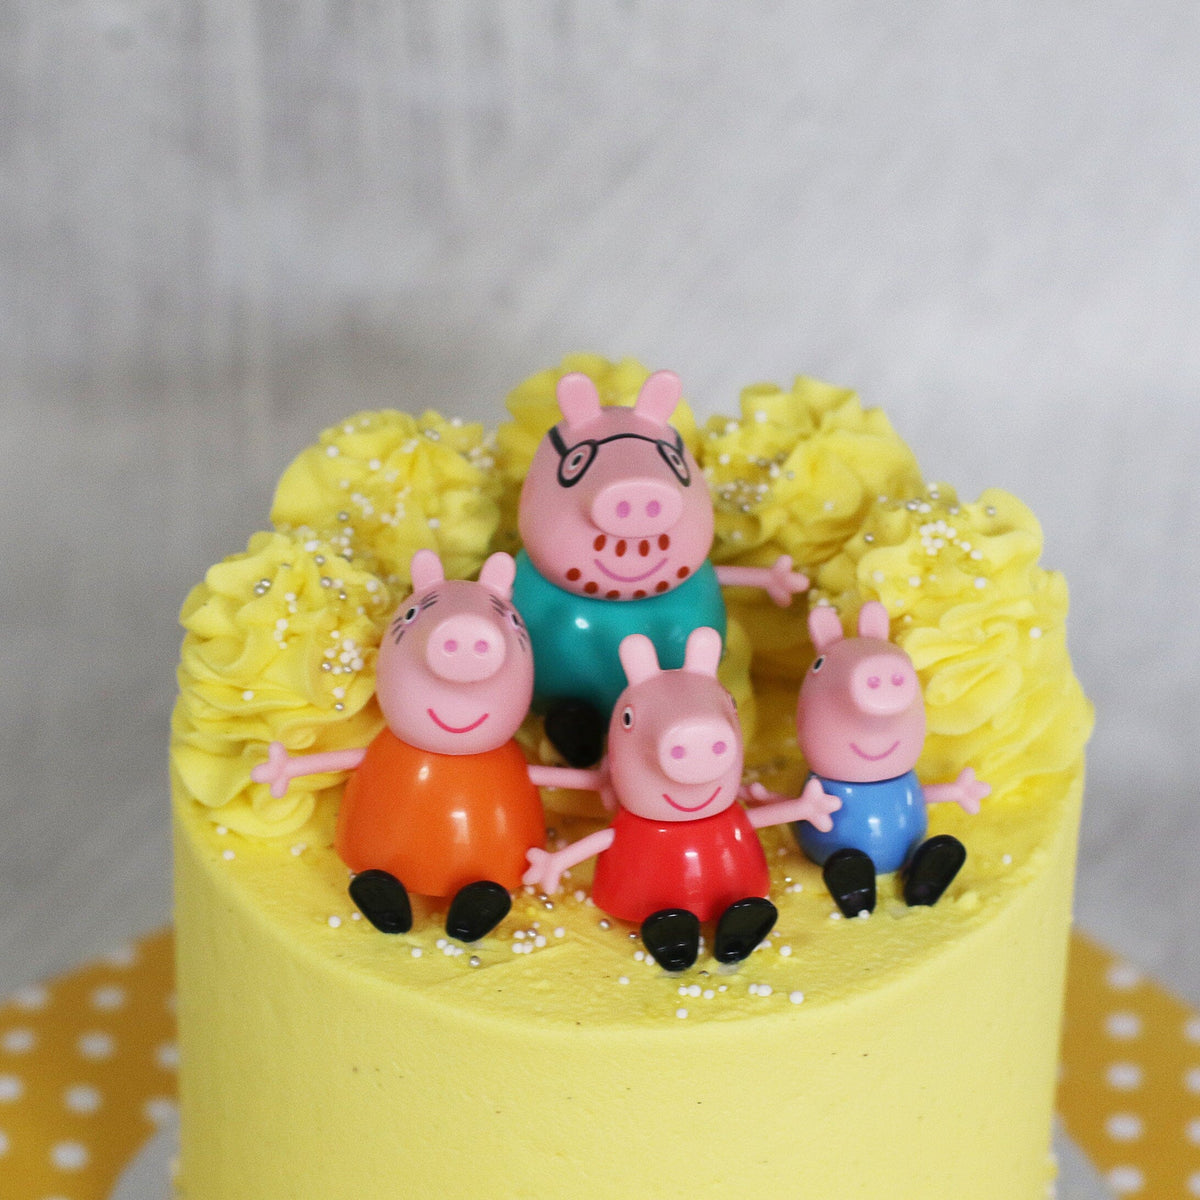 Peppa Pig Cake The Cupcake Queens 